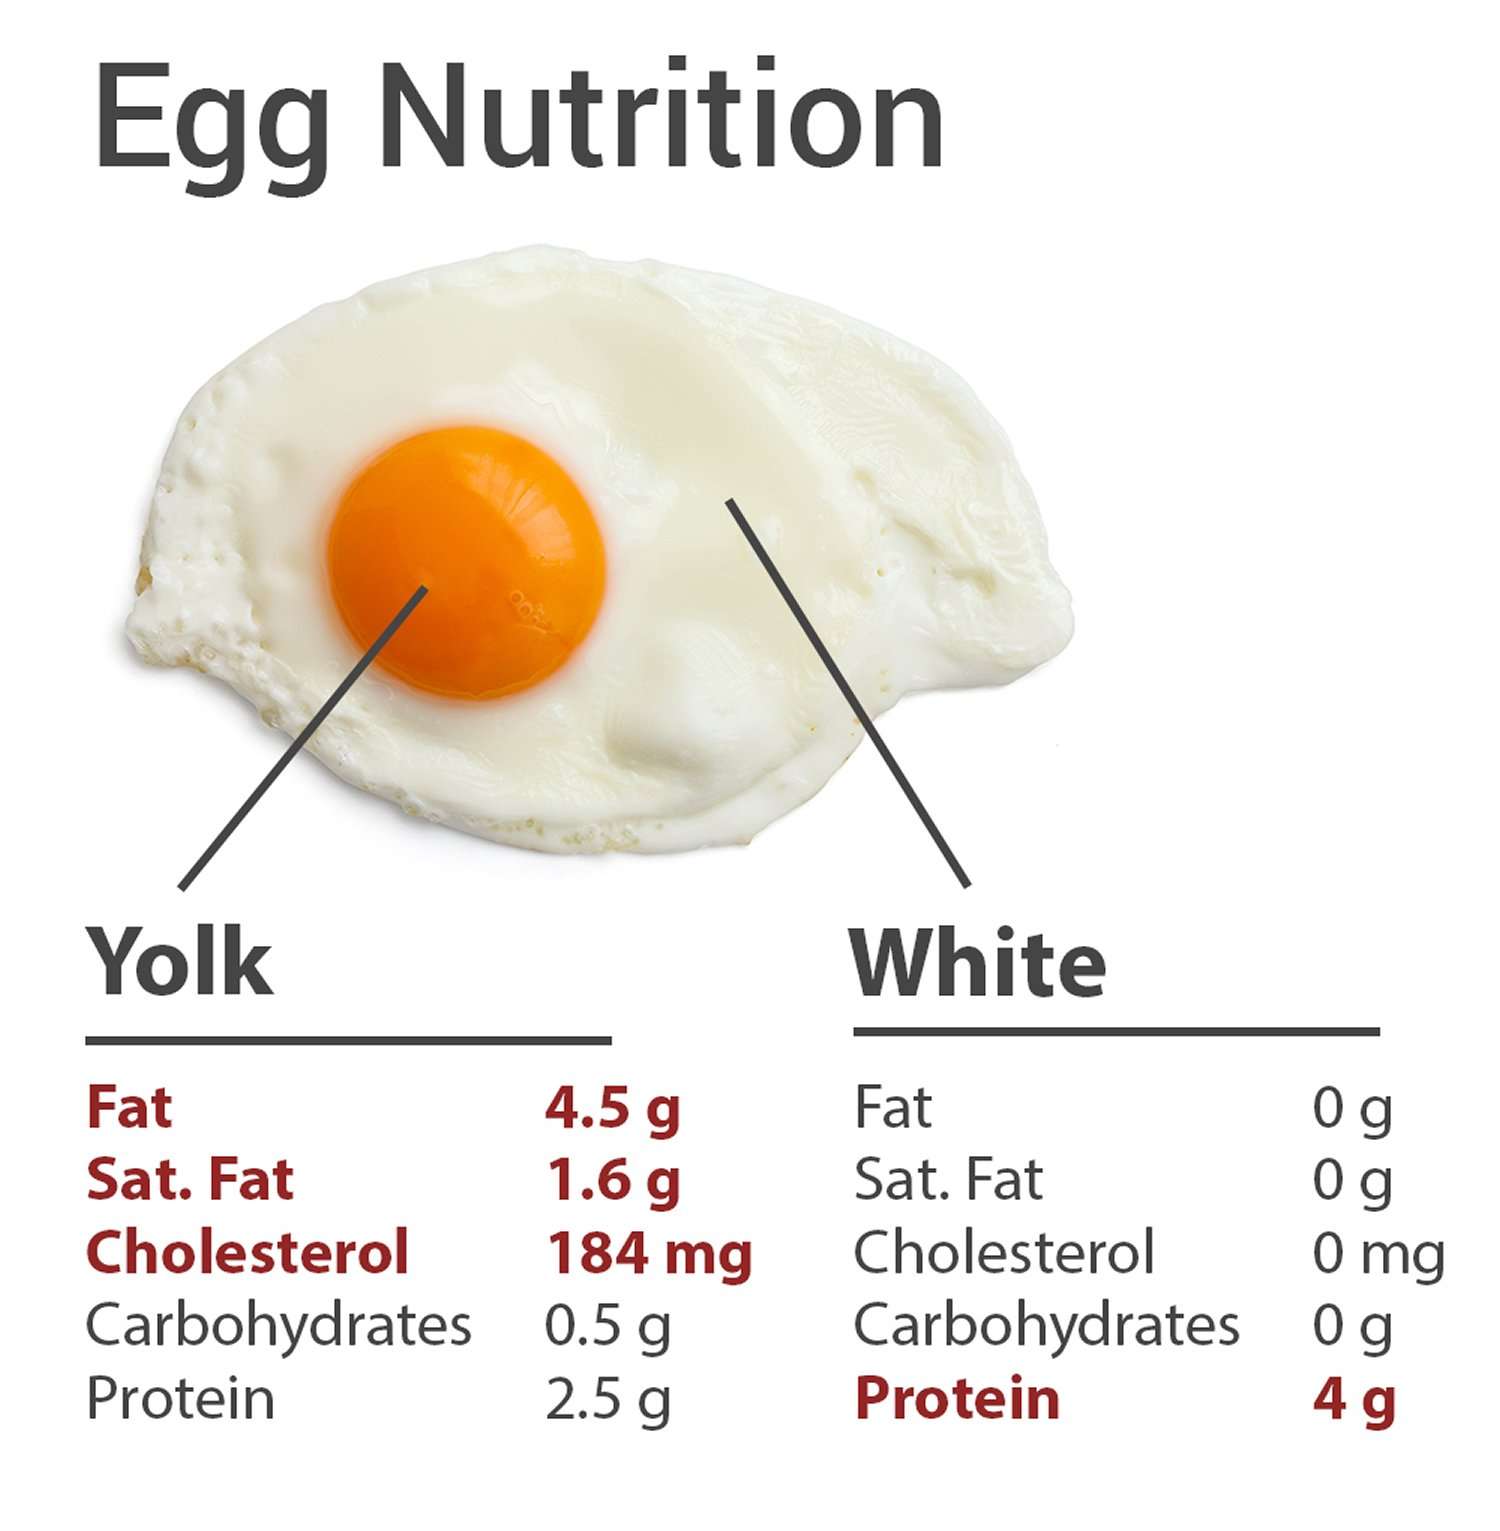 Do Eggs Cause High Cholesterol? Are Eggs Bad for Cholesterol?